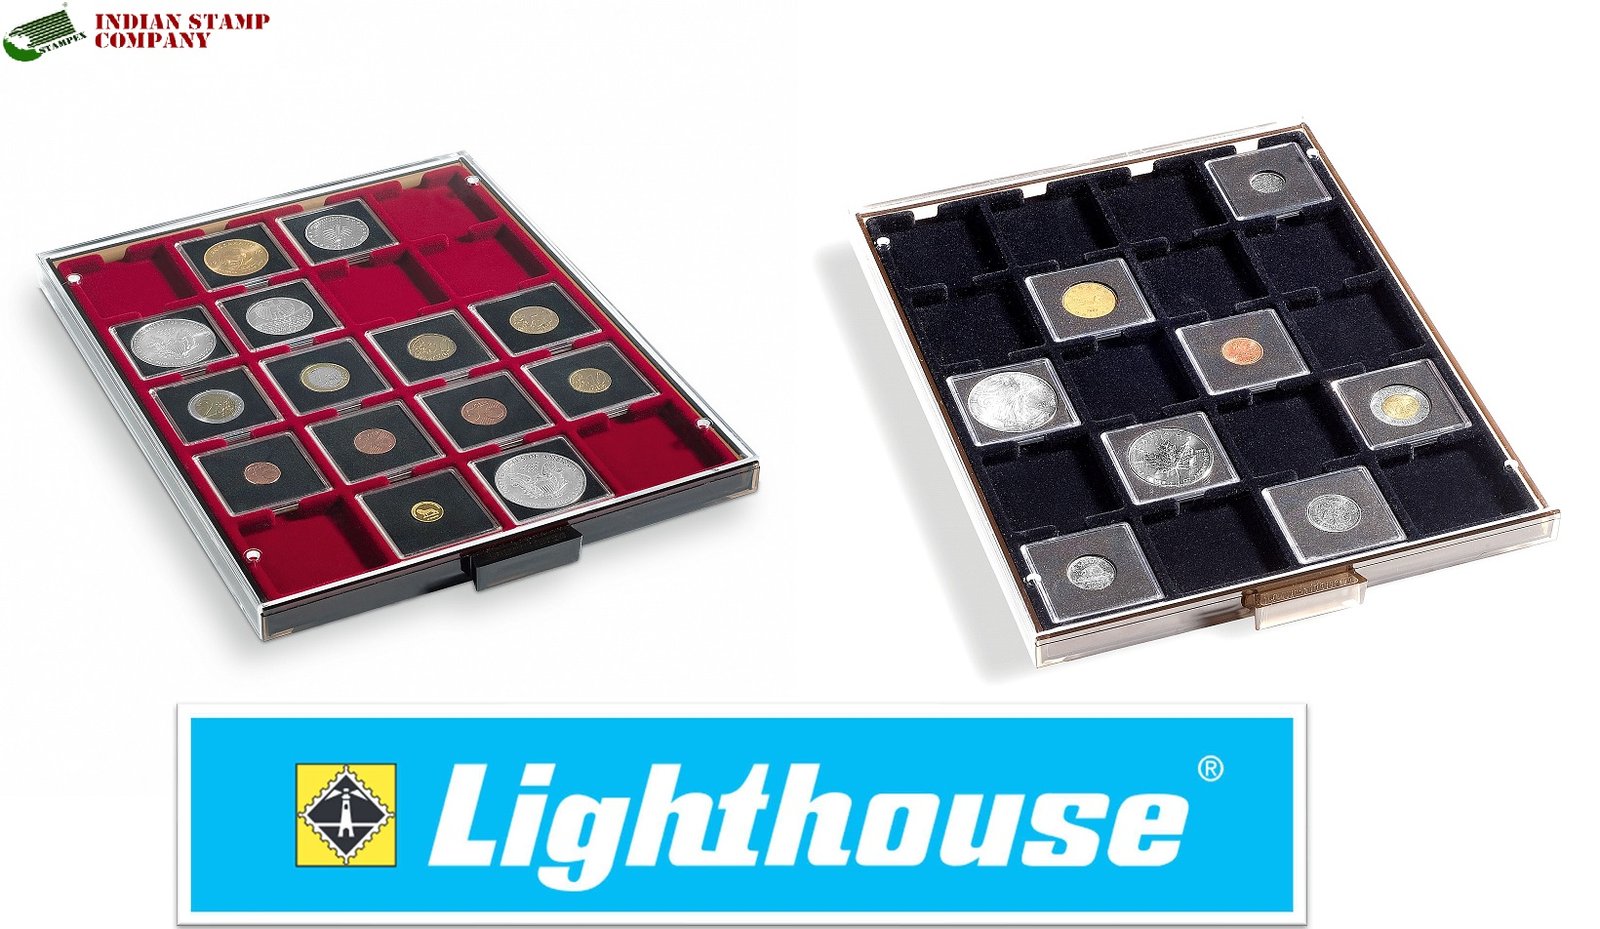 LIGHTHOUSE Coin Box Tray (Red/Black), 20 Square Compartments 50 x 50 mm, Made In Germany